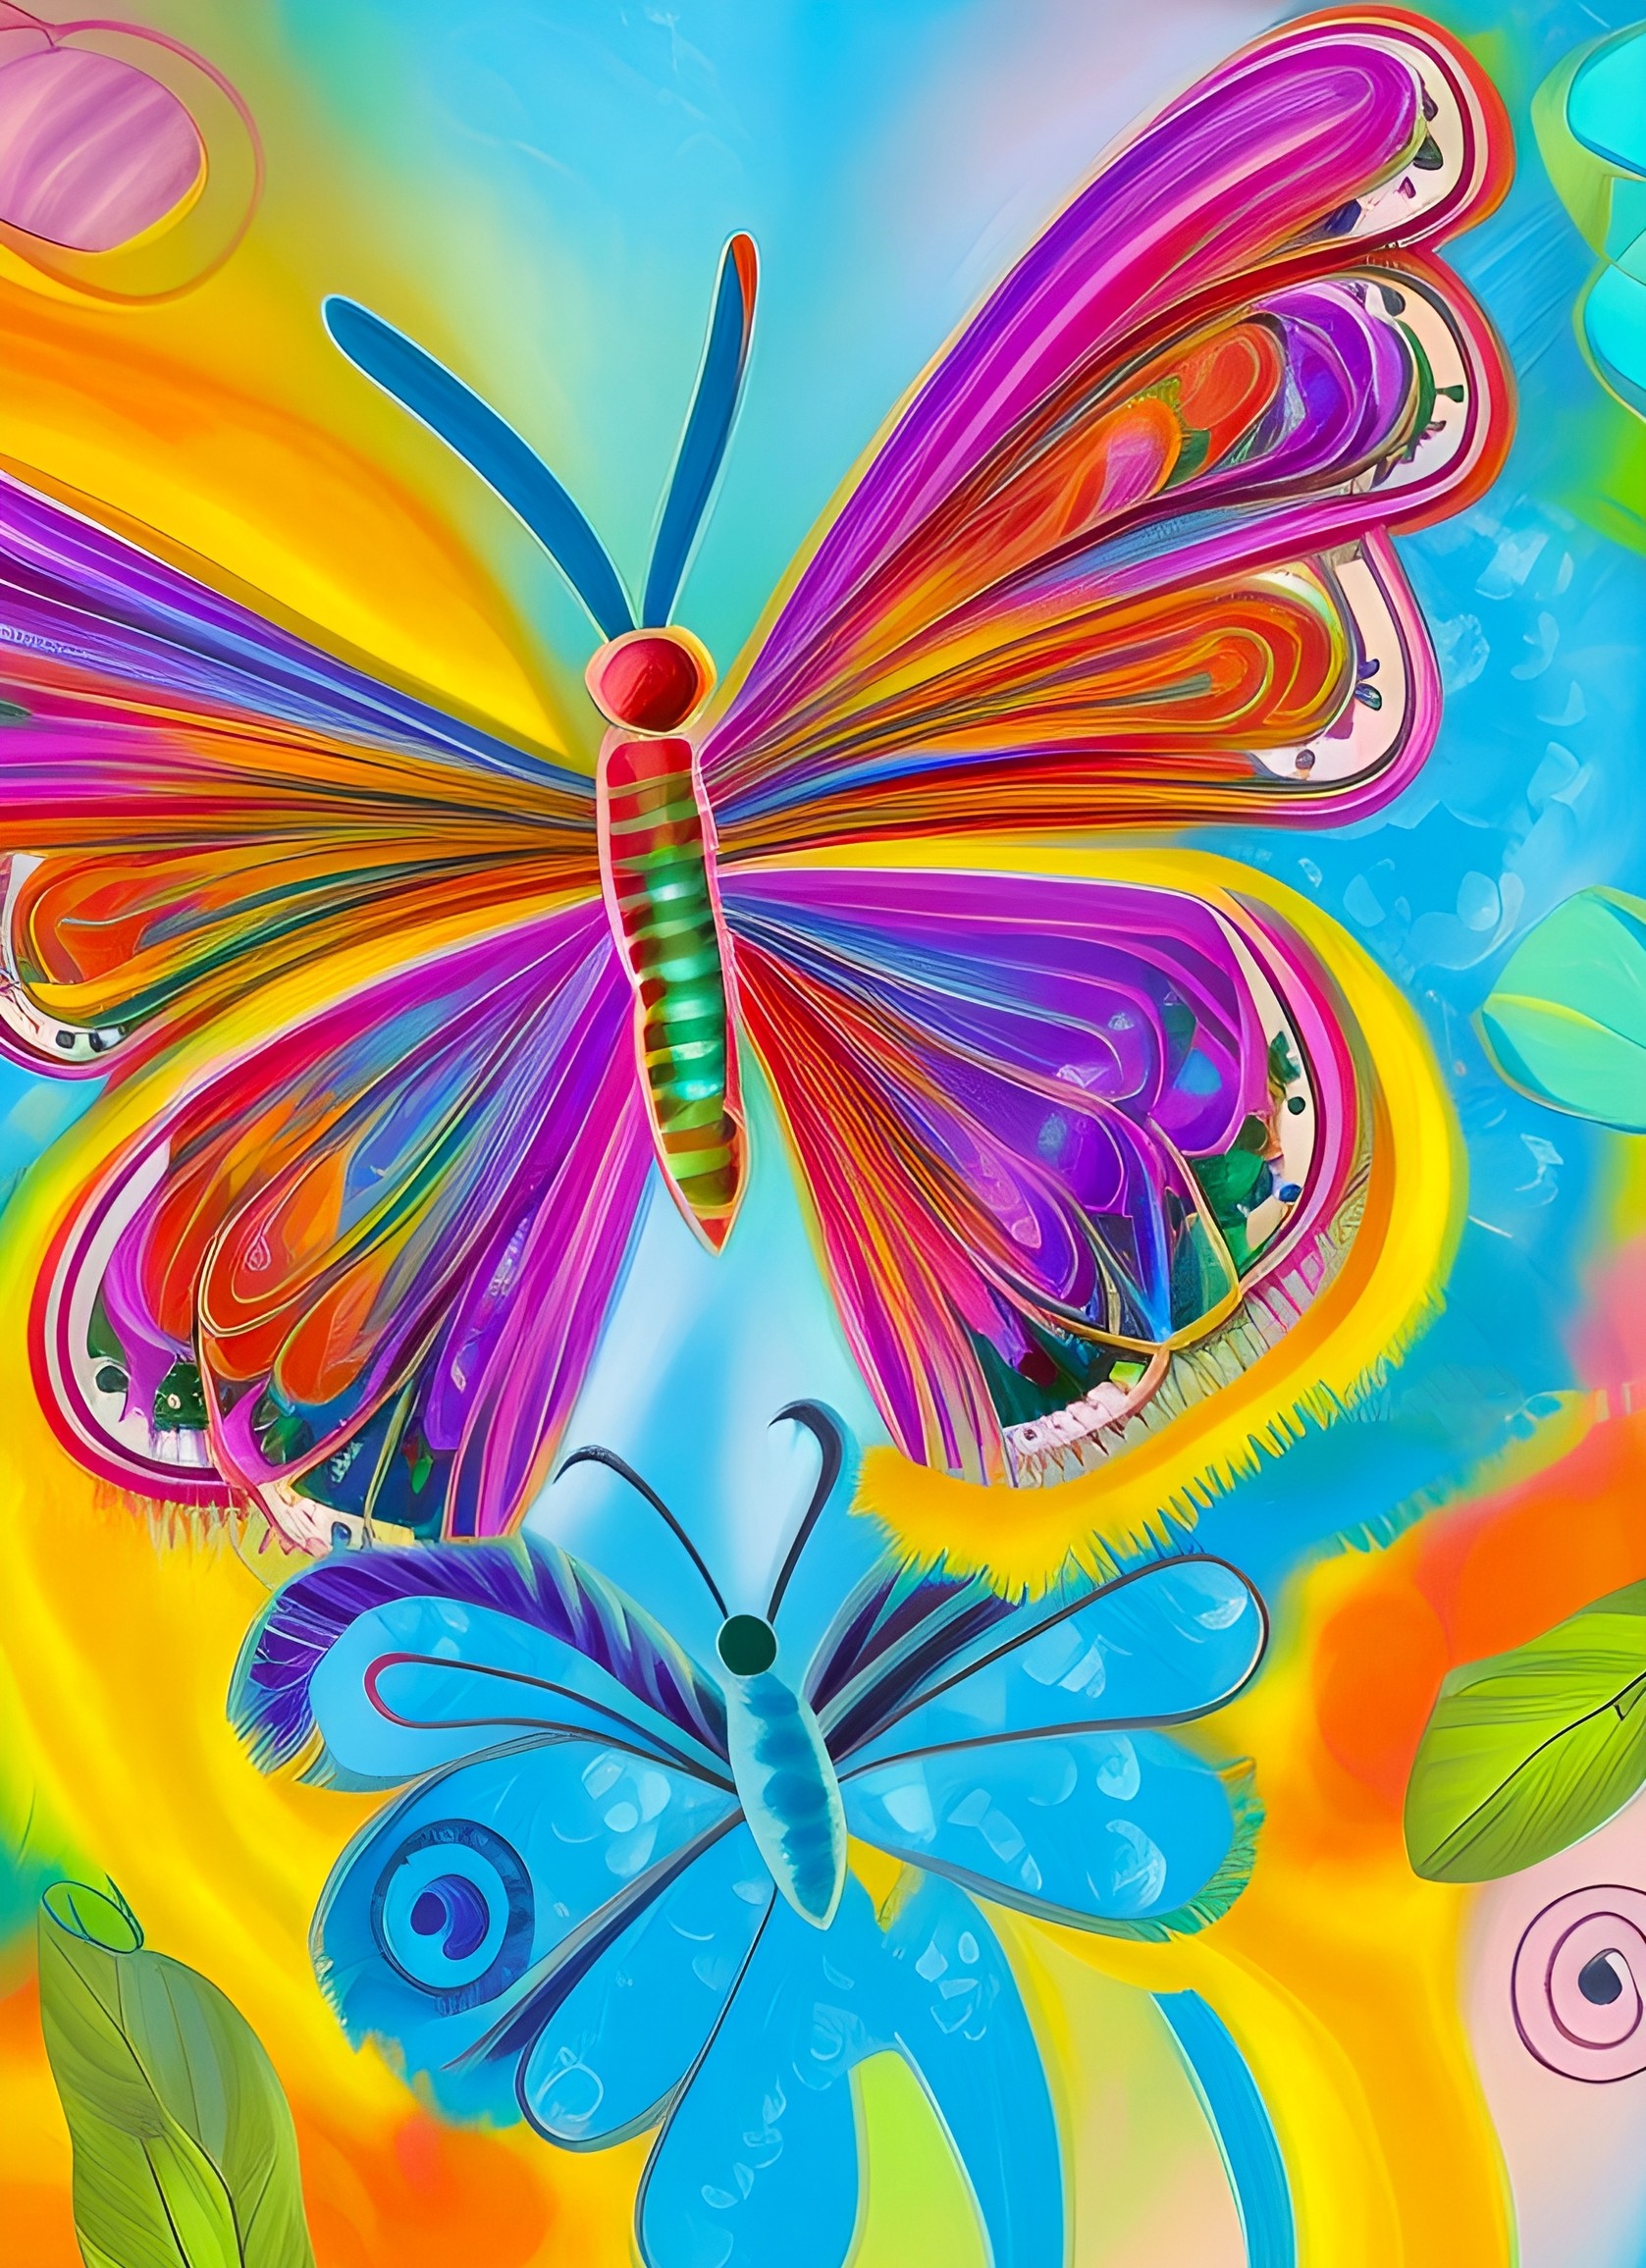 Butterfly Animal Colourful Abstract Art Blank Greeting Card